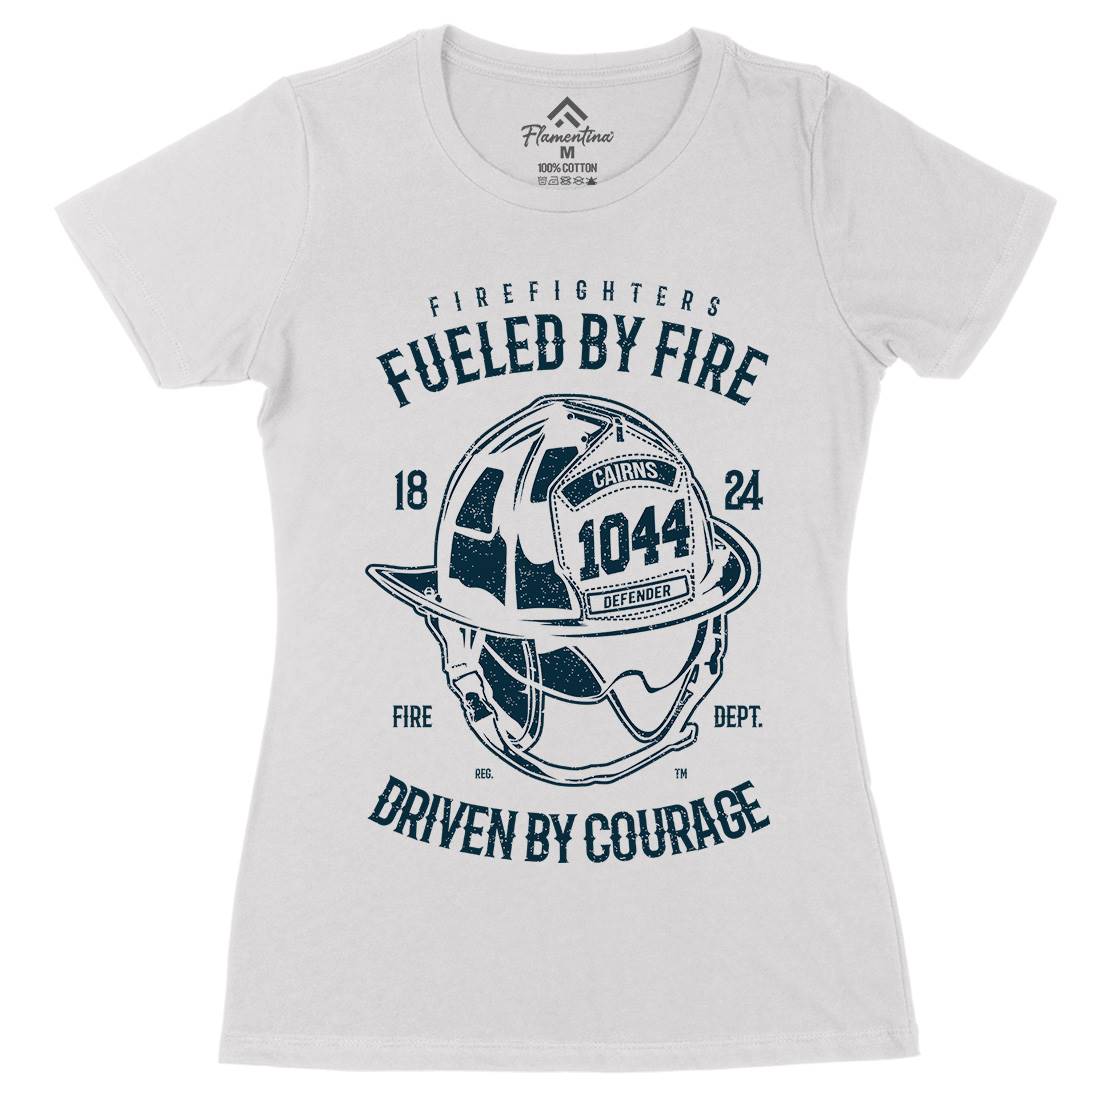 Fuelled By Fire Womens Organic Crew Neck T-Shirt Firefighters A667